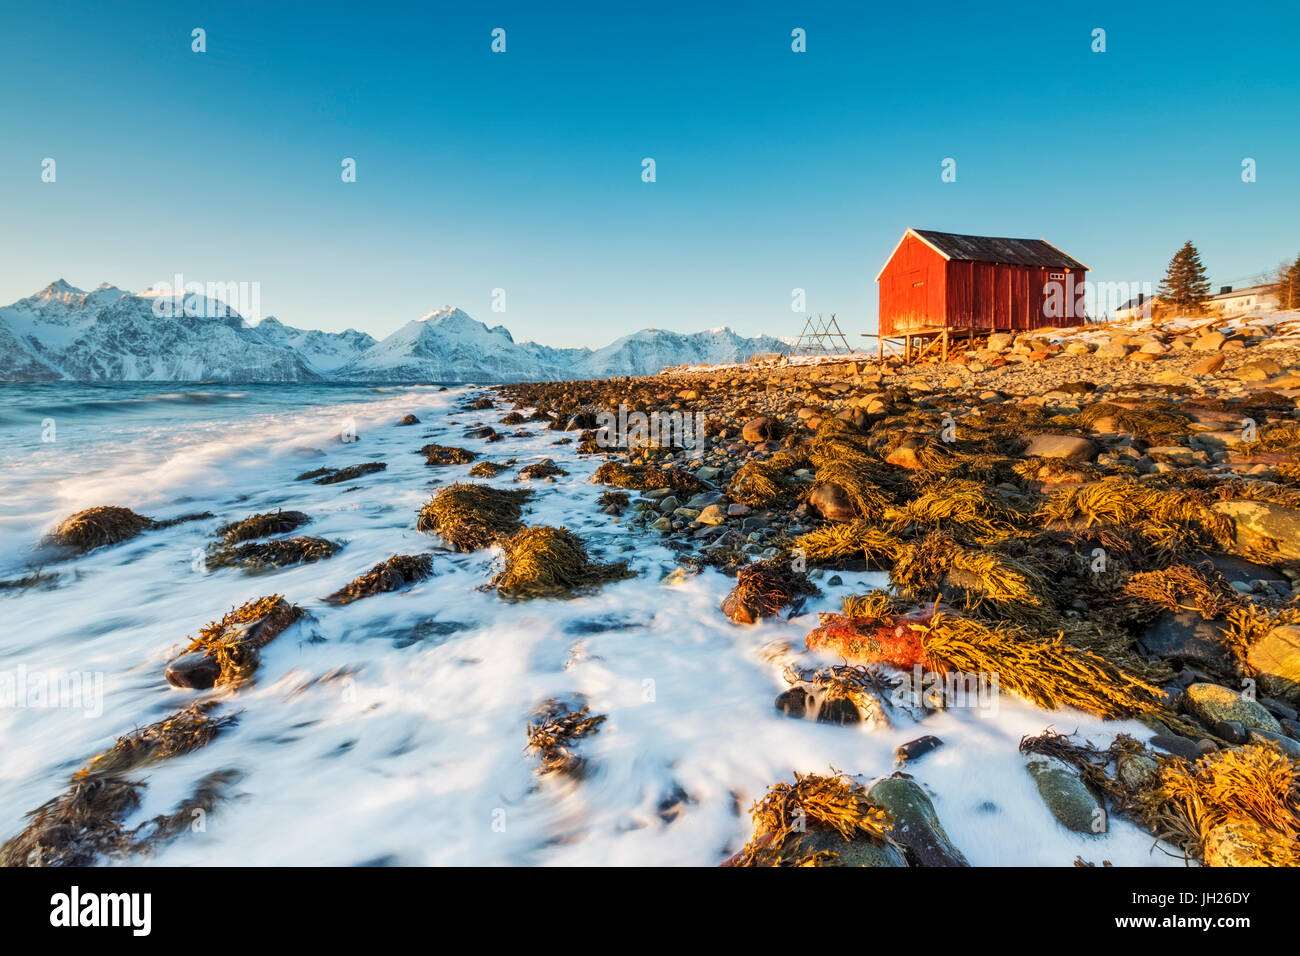 Typical wooden hut called Rorbu surrounded by waves of the cold sea and snowy peaks, Djupvik, Lyngen Alps, Troms, Norway Stock Photo